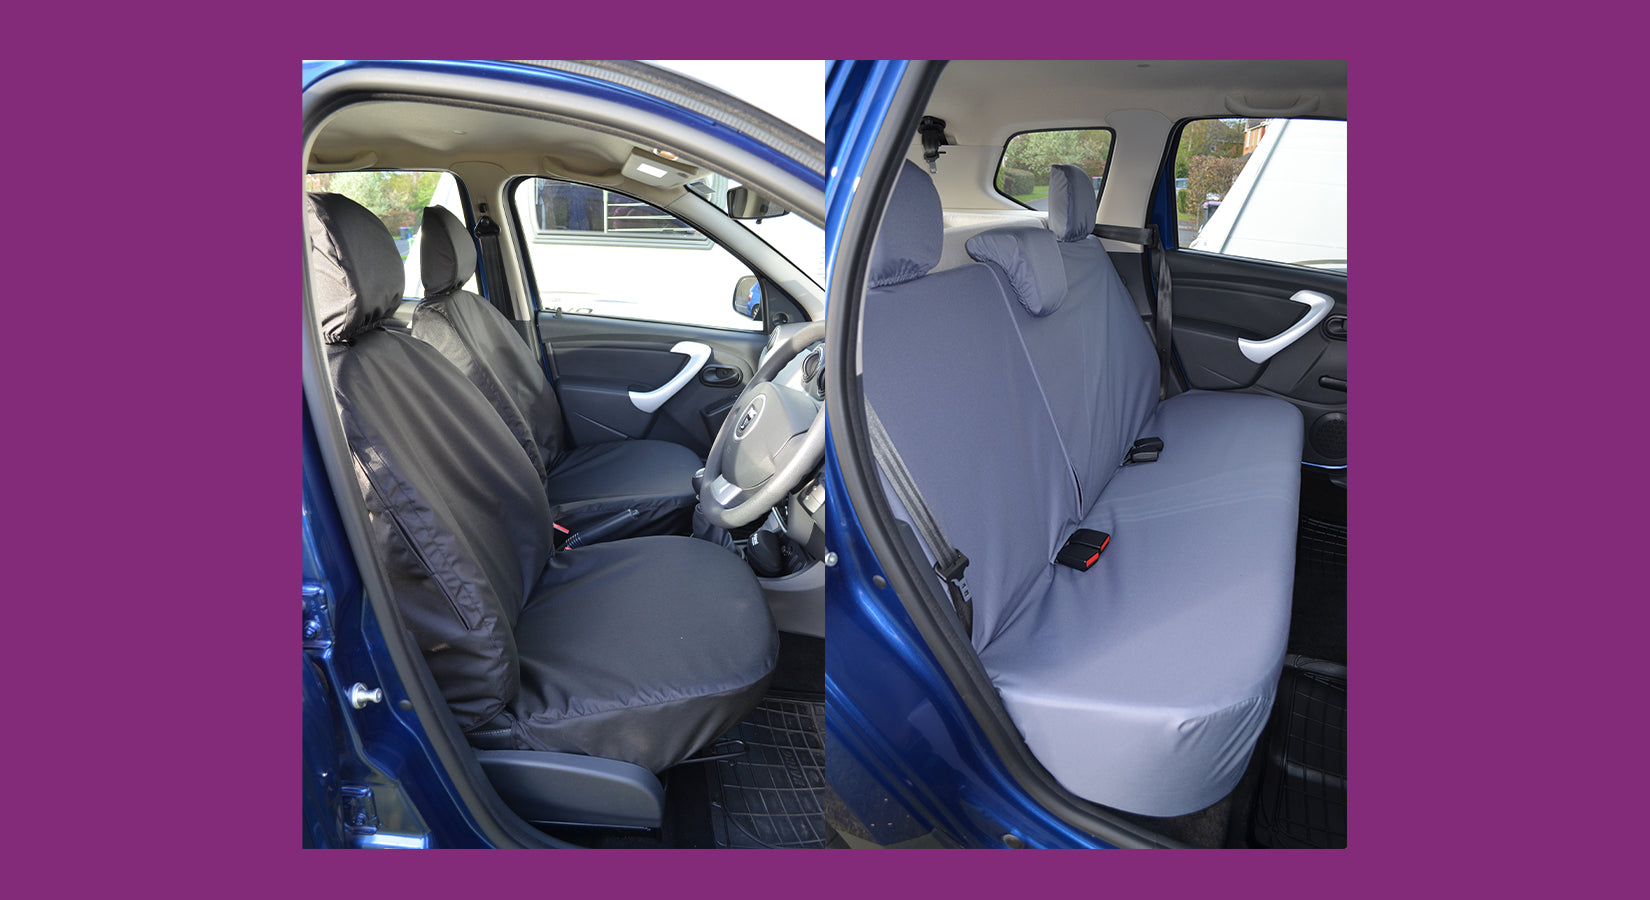 Dacia Duster 2013-2018 Seat Covers now listed!